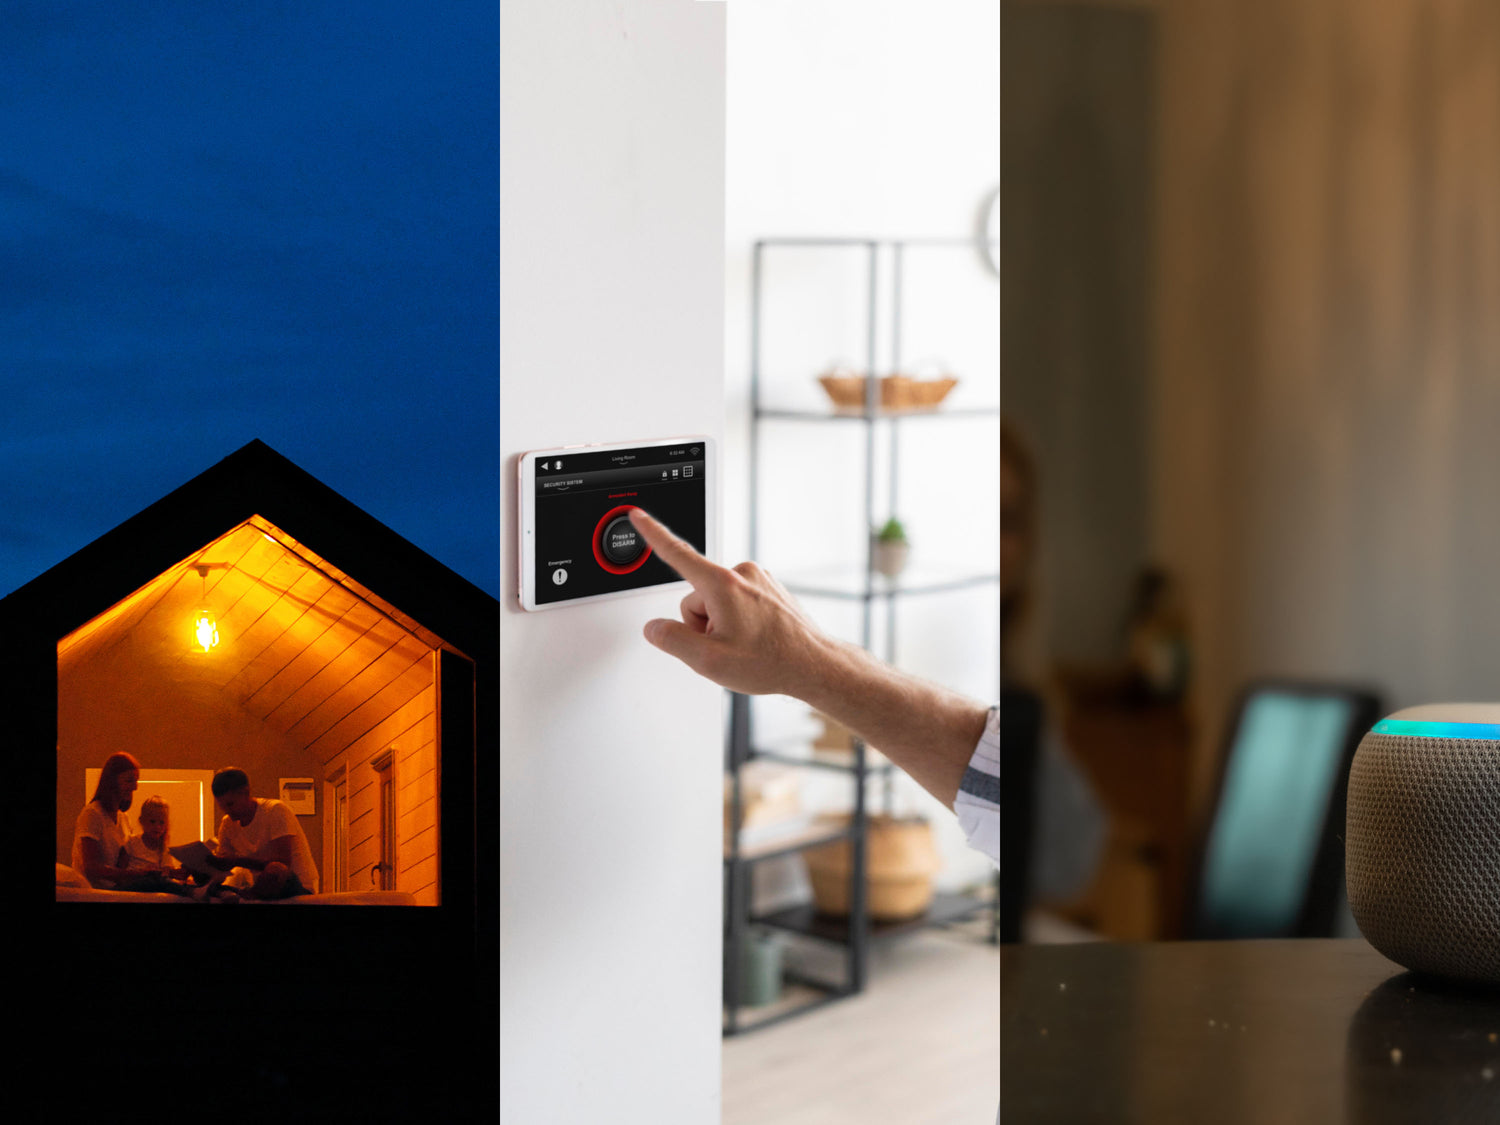 Home automation or smart home